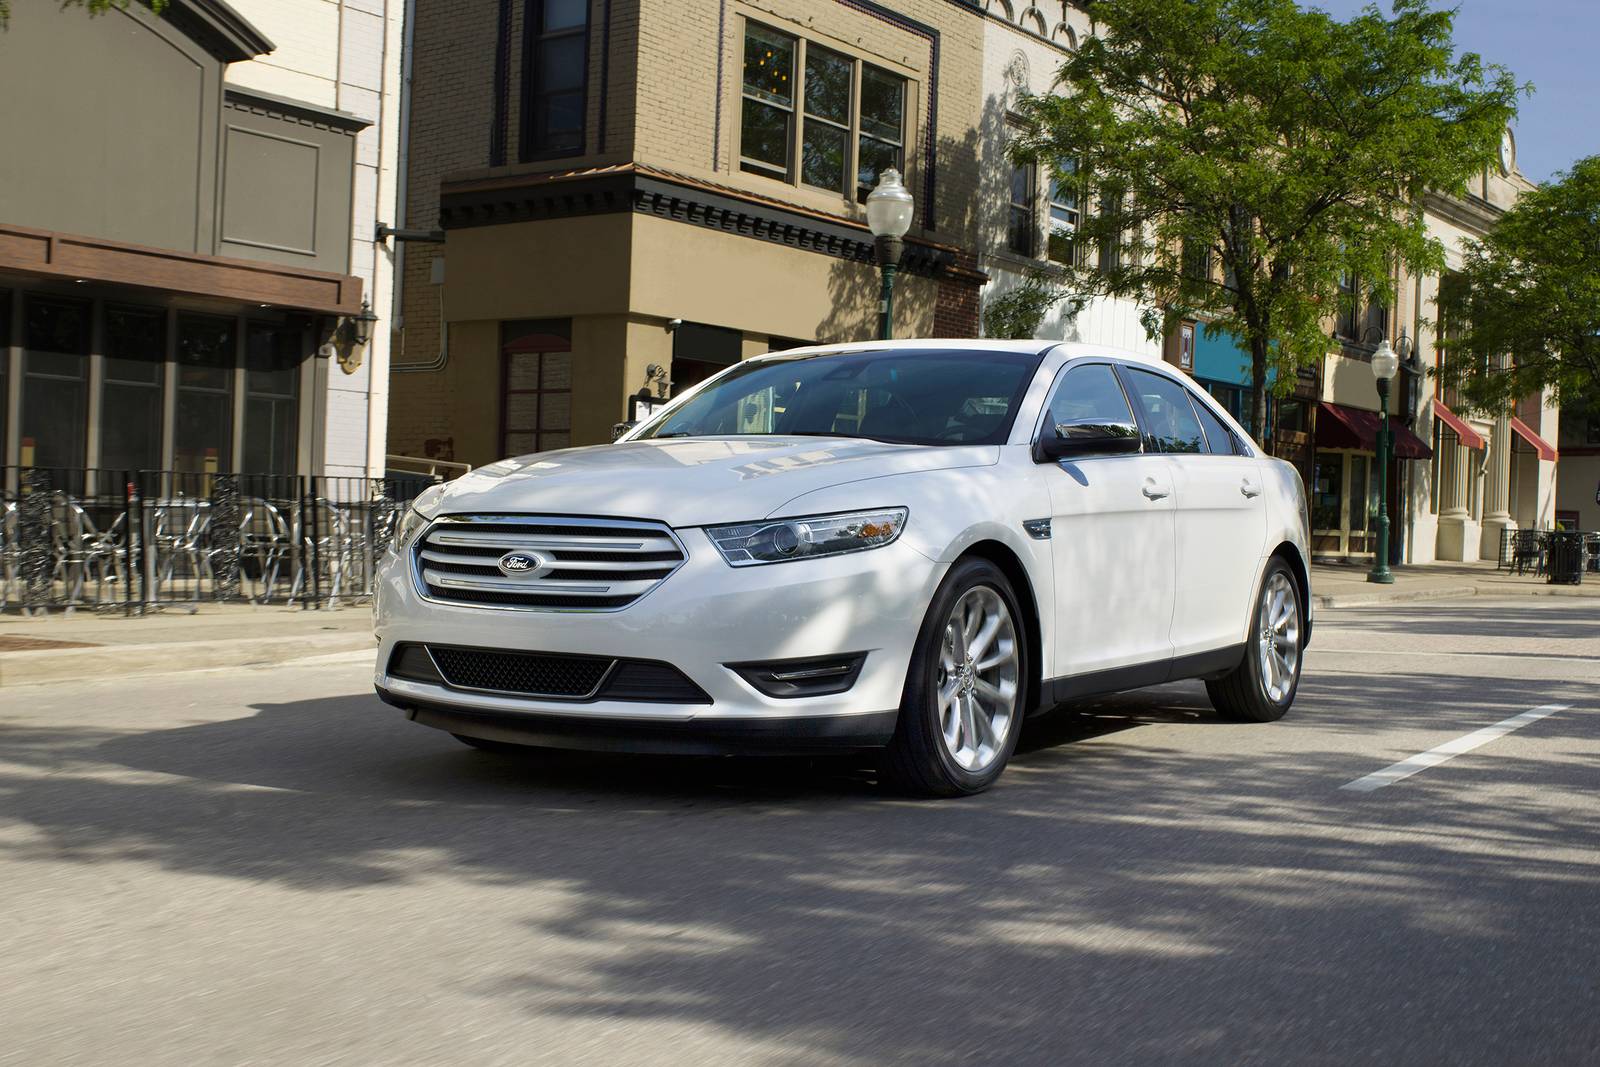 2019 Ford Taurus Review & Ratings | Edmunds